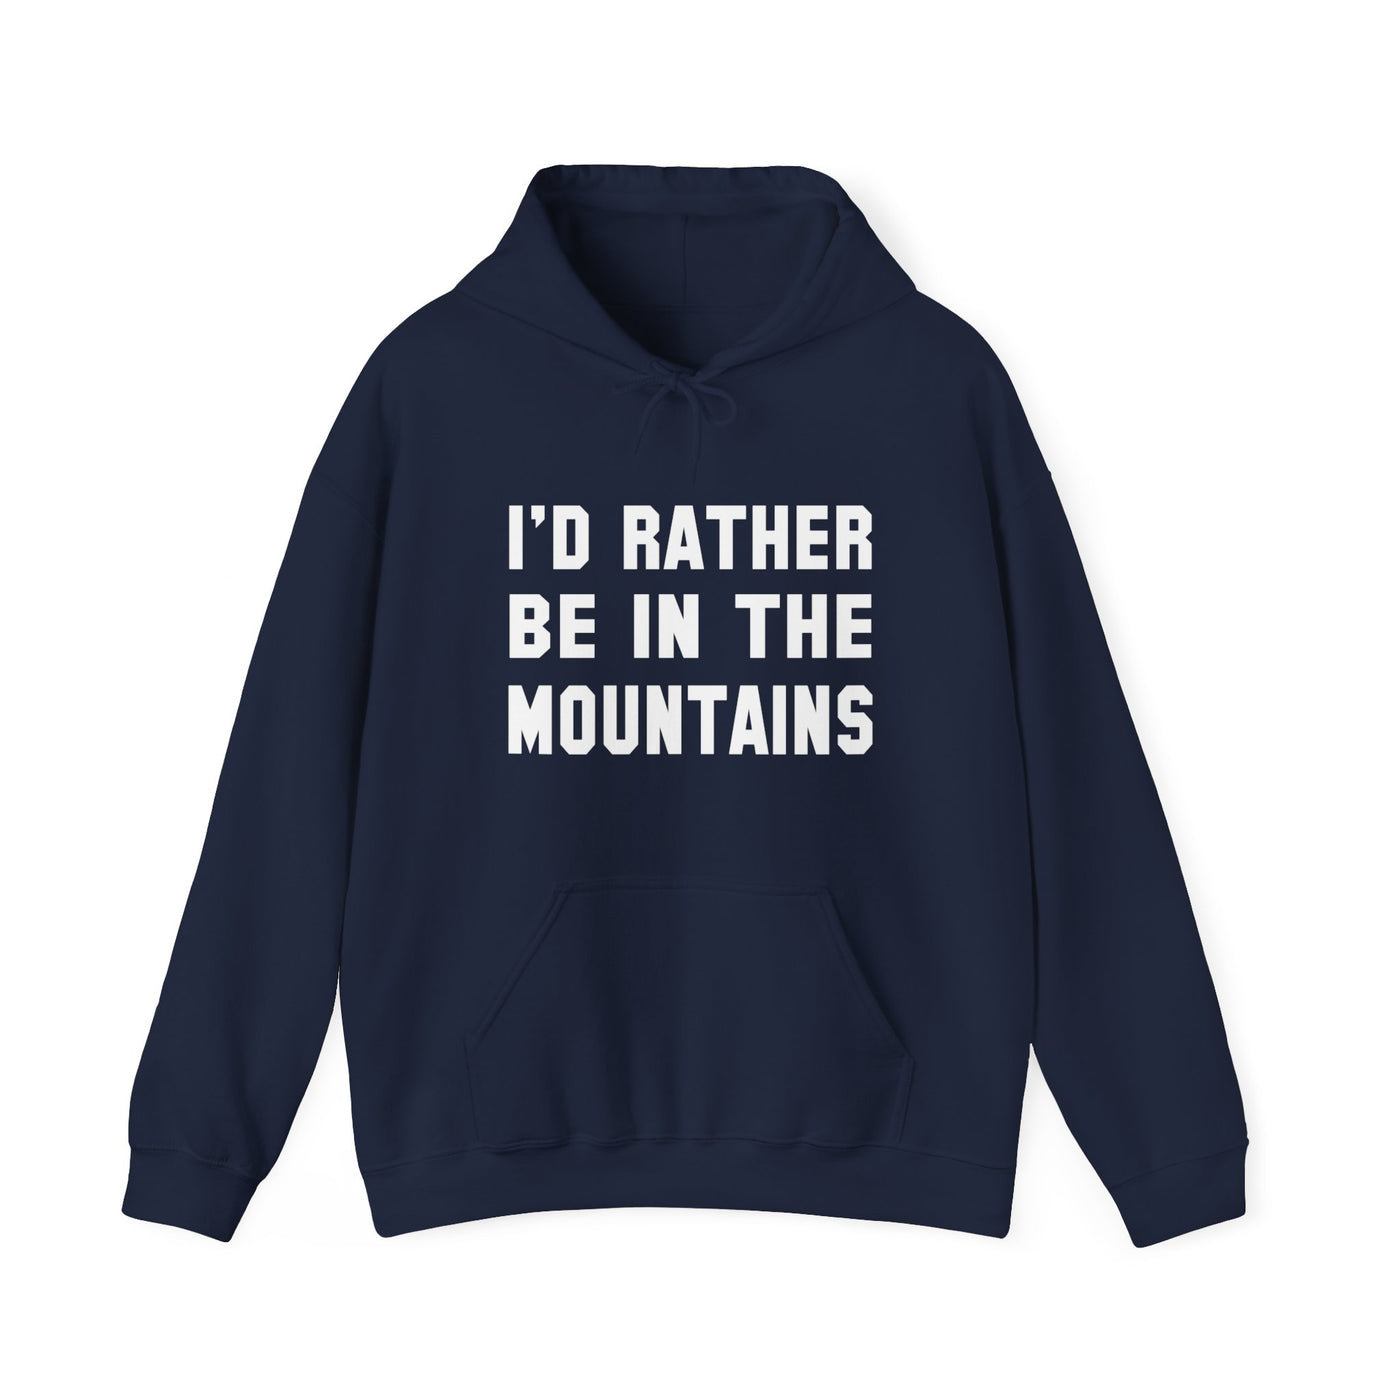 I'd Rather Be In The Mountains Hooded Sweatshirt